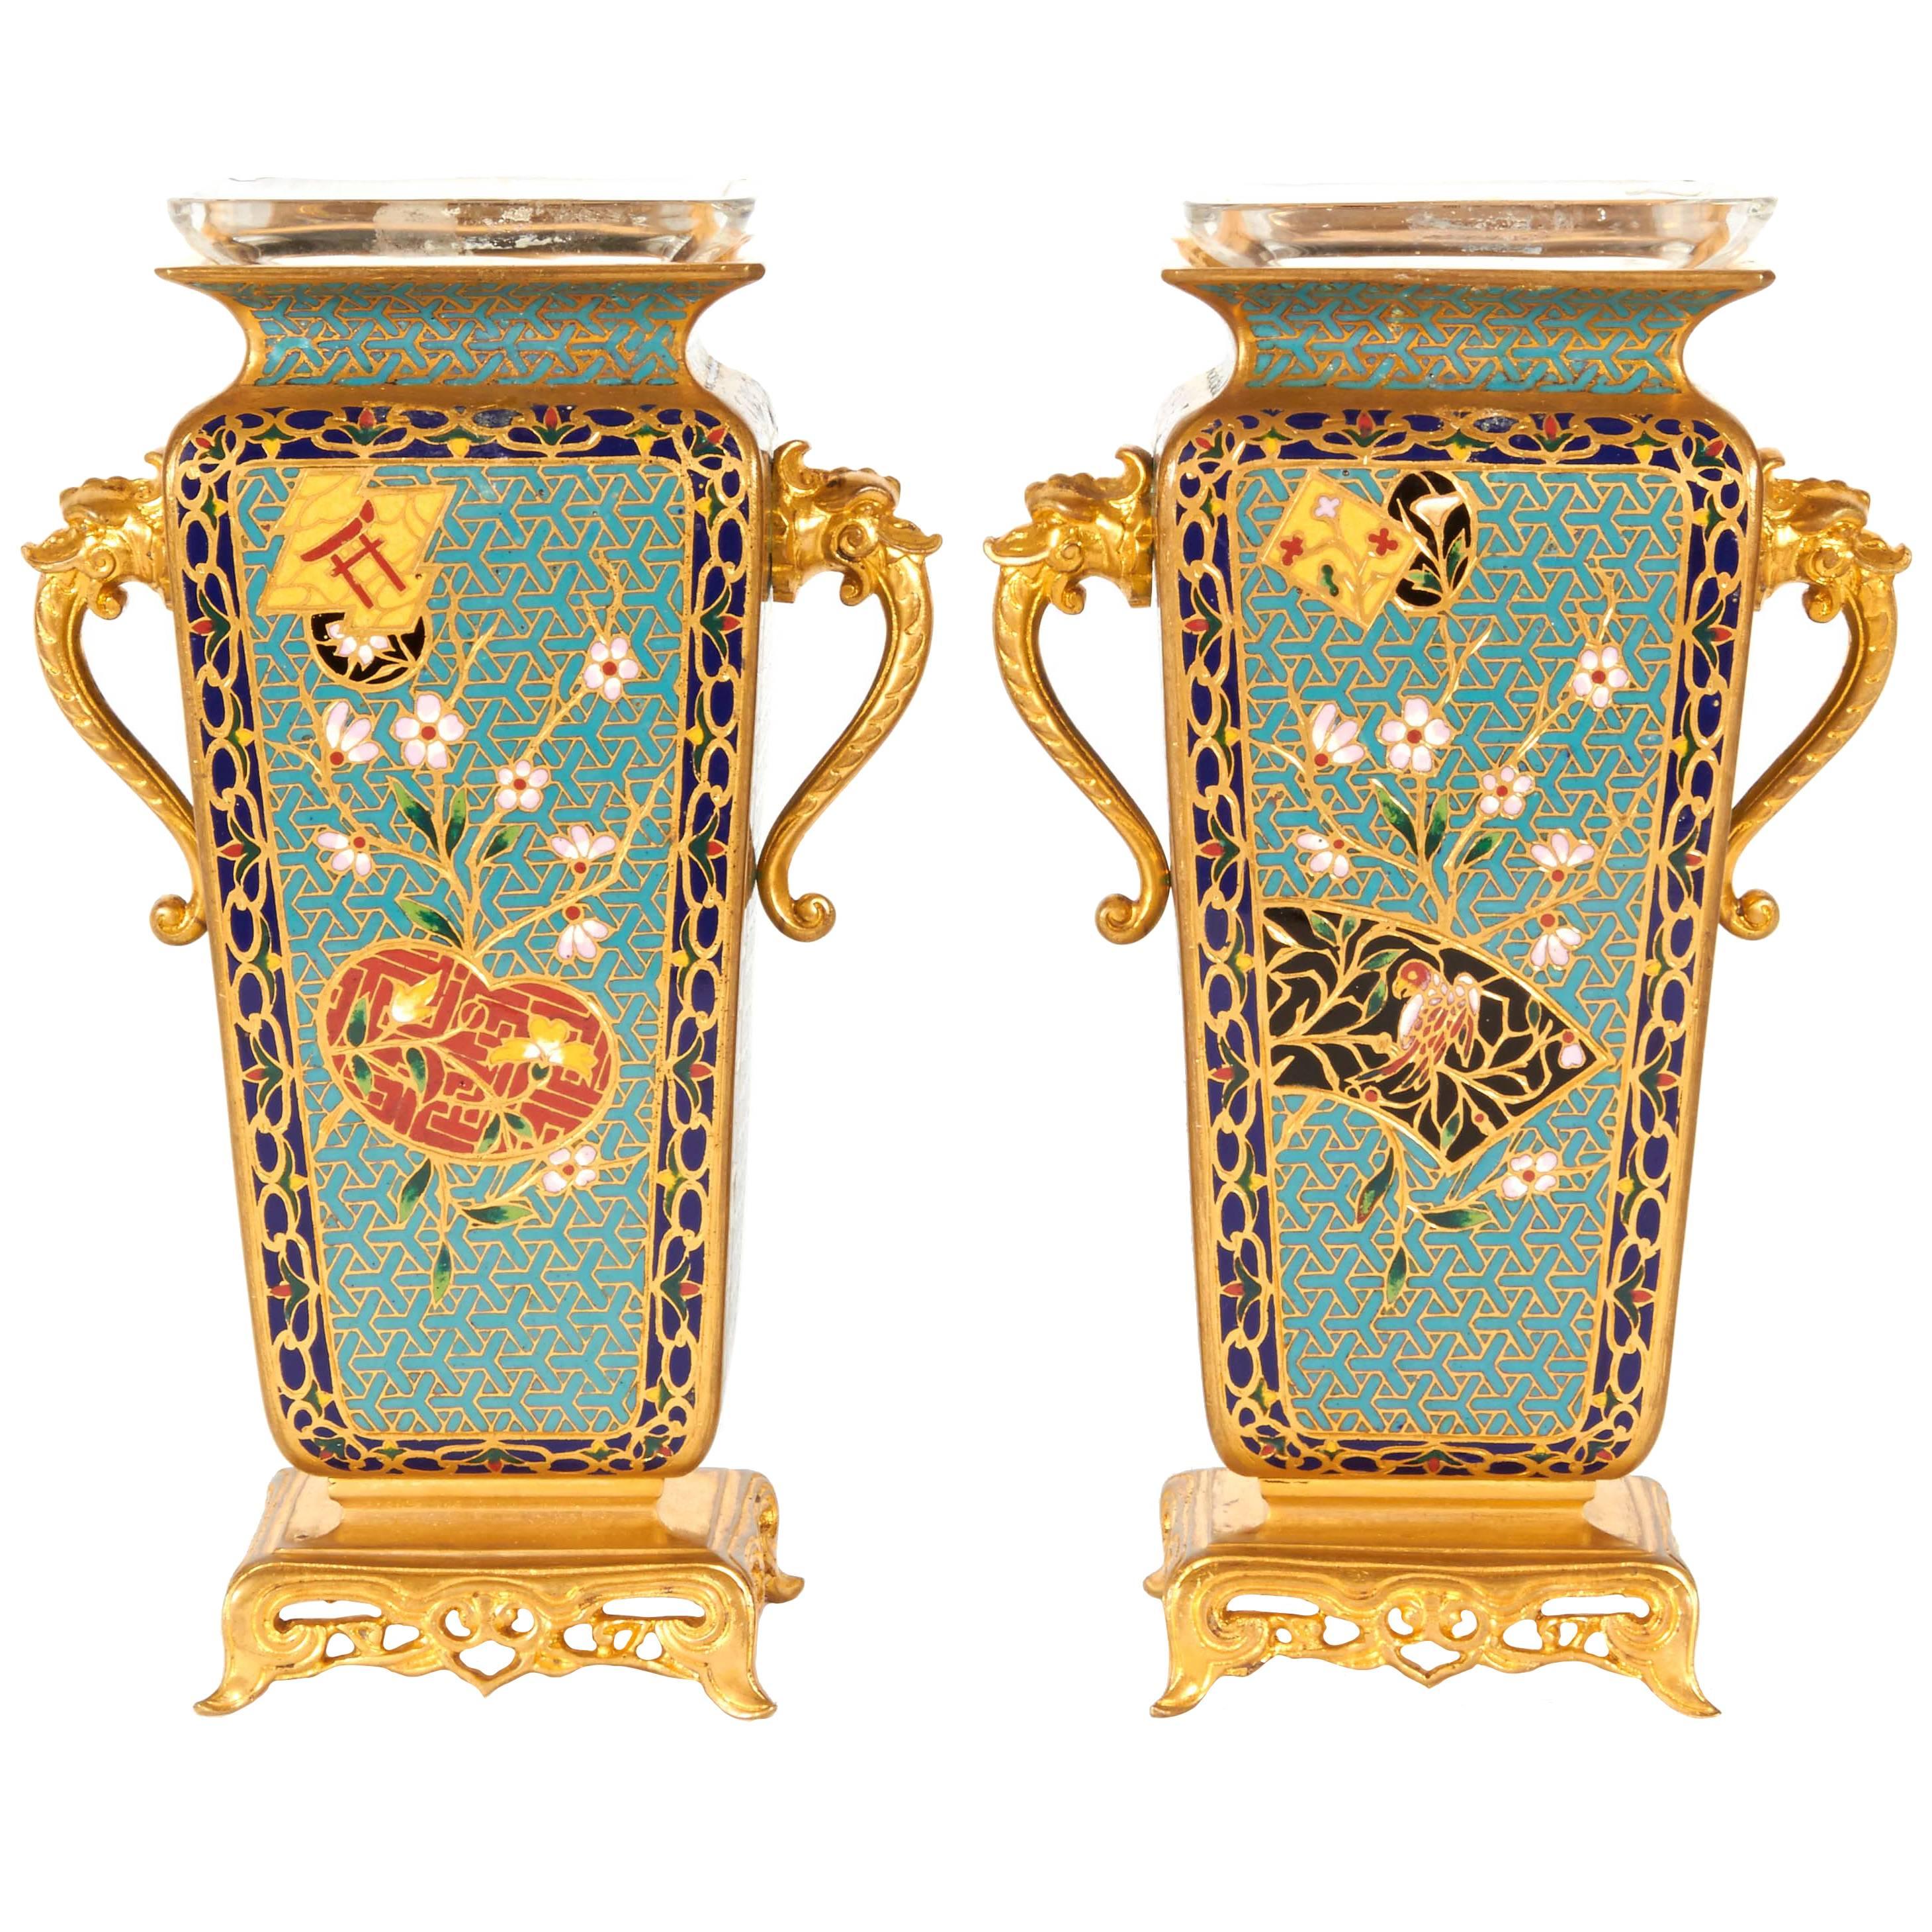 Pair of French Japonisme Ormolu and Champlevé Cloisonné Enamel Vases